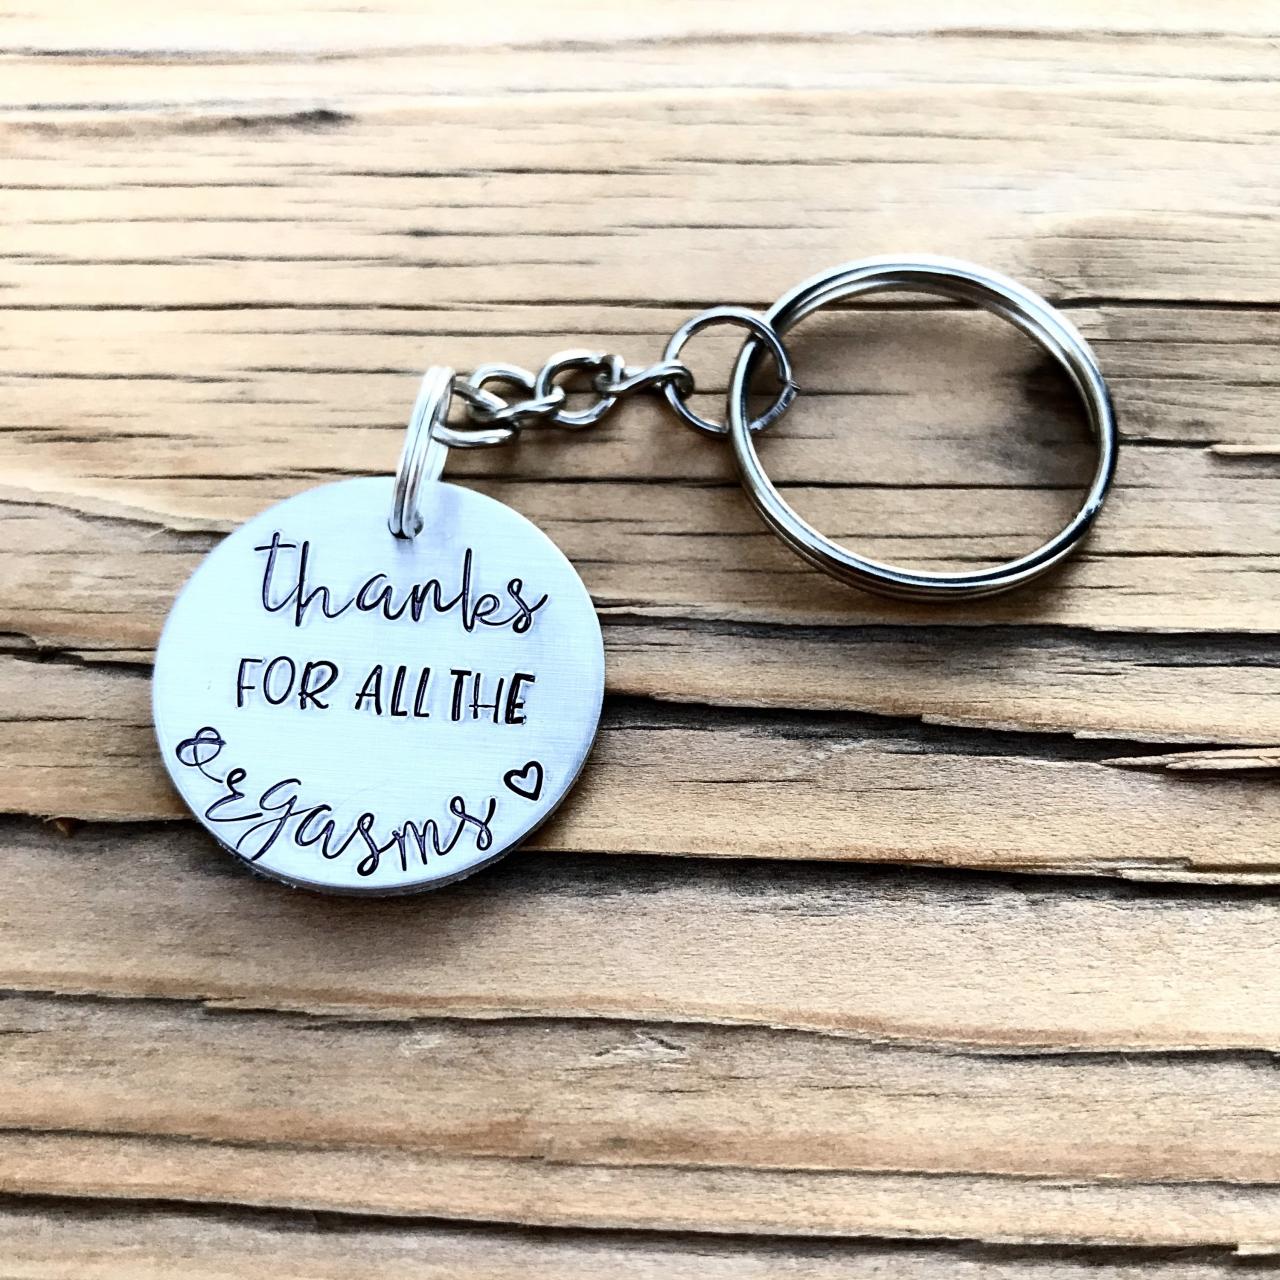 Thanks For All The Orgasms Keychain, Non Binary, Funny Gag Gift, Personalized Anniversary Present, Customizable Stamped Metal